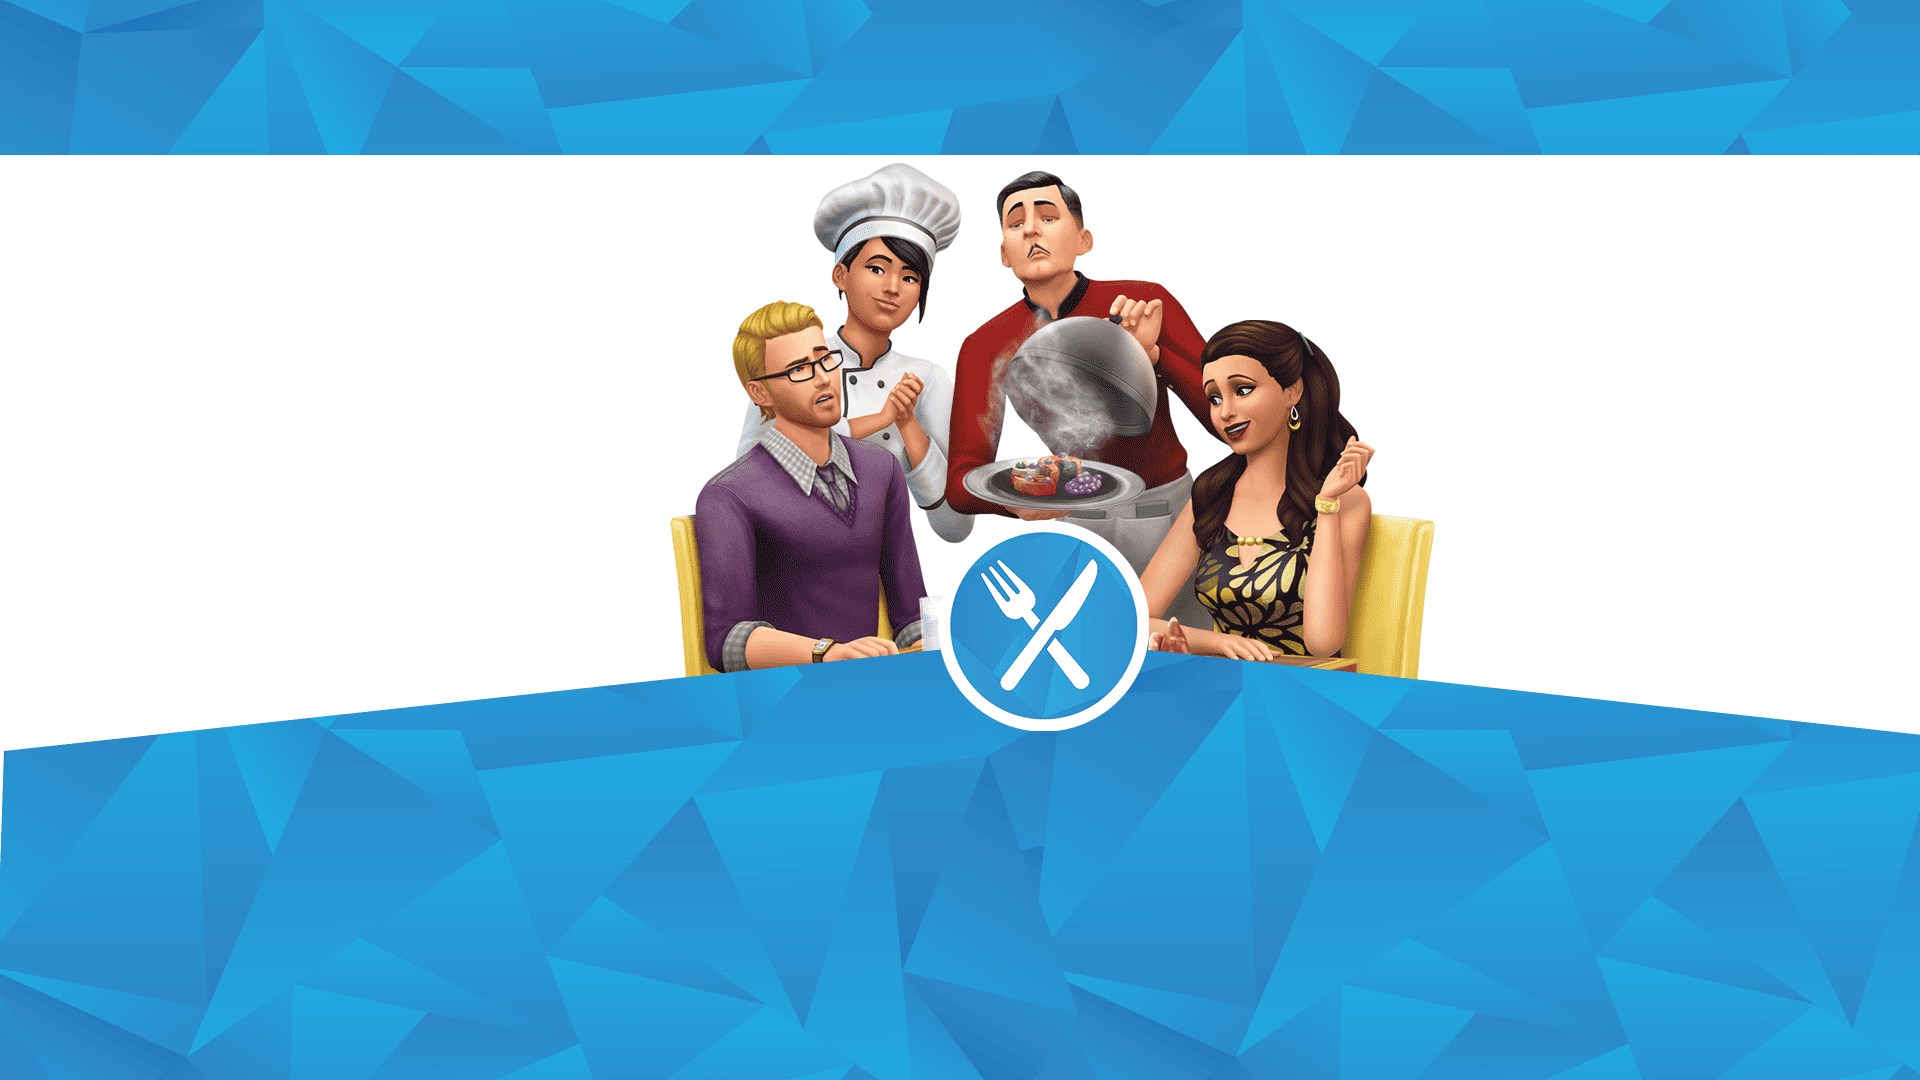 The Sims 4 Cheats Complete Updated [PC/PS4/XBOX] Latest